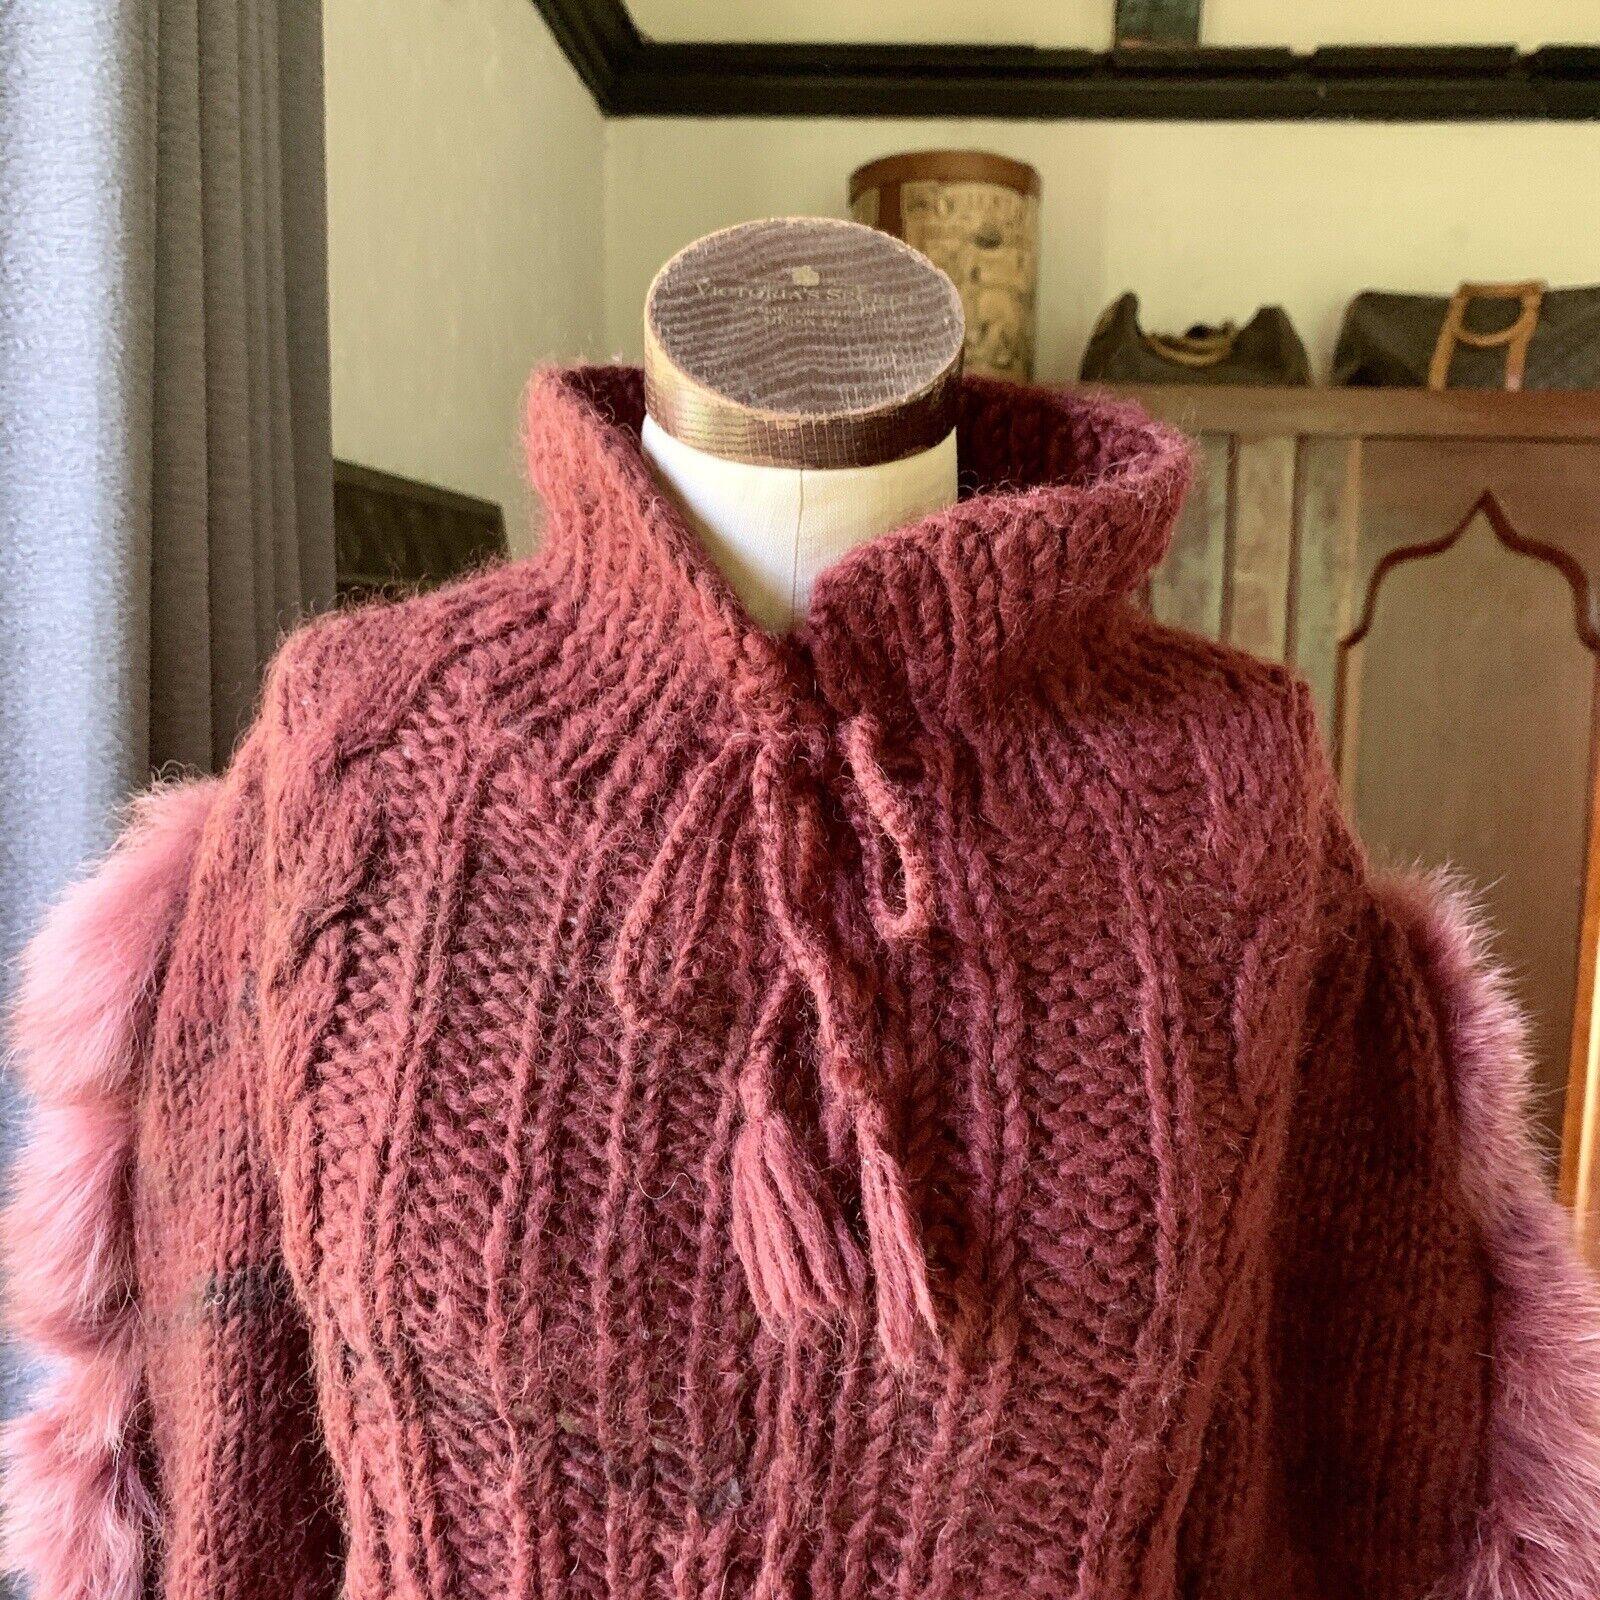 Delaware Street, Made in USA, Dyed Fox Fur on Sleeves, Burgundy Color, Handmade Cashmere Blend Cable Knit, Tie Top and Waist Tie to Clinch

Measurements Laying Flat (Has Stretch)

Bust 21